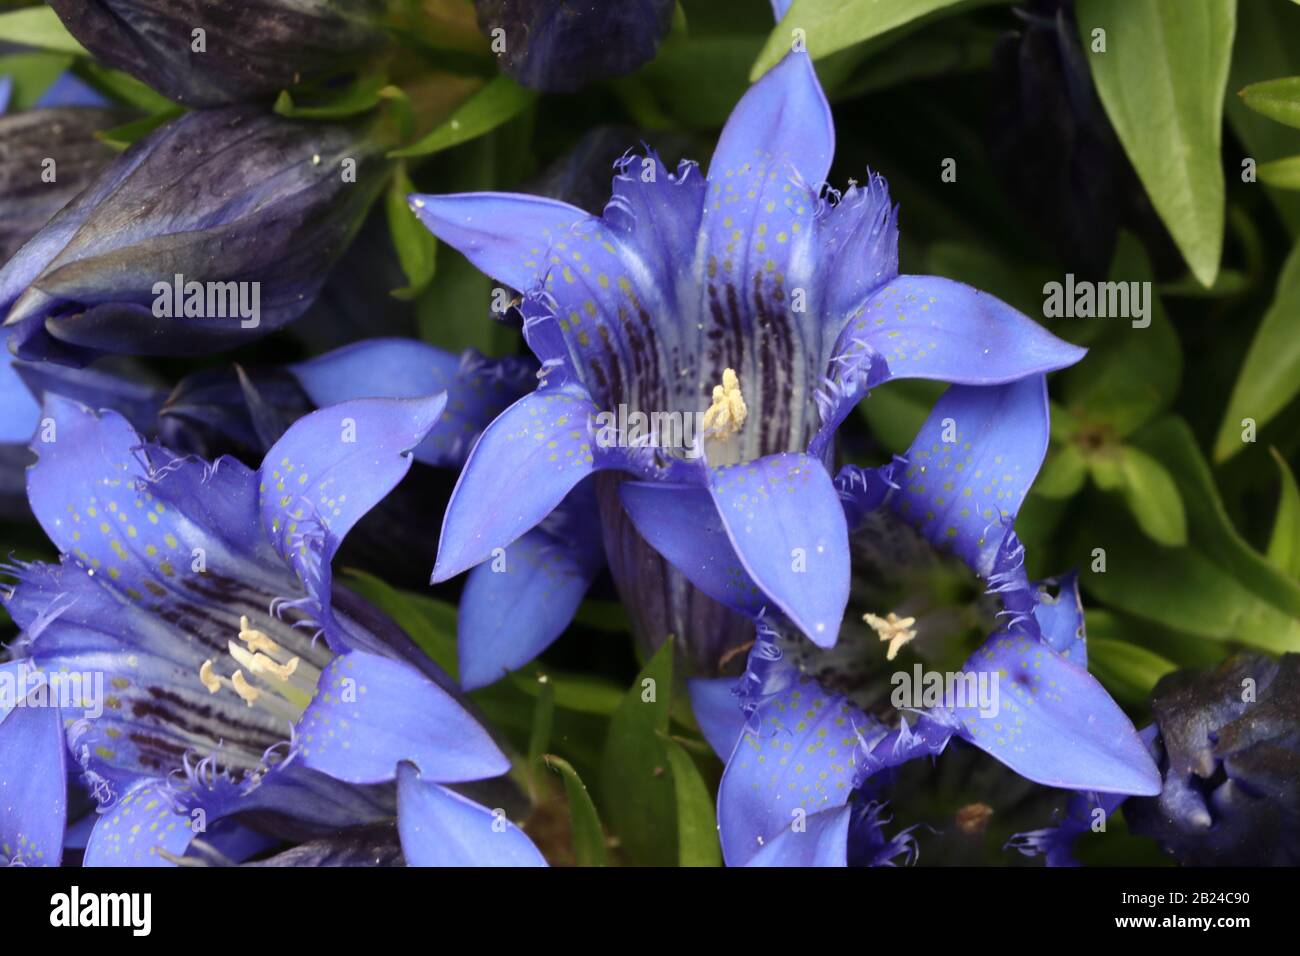 Gentiana paradoxa is a species of flowering plant in the family Gentianaceae, endemic to the foothills of the Greater Caucasus Mountains. Stock Photo